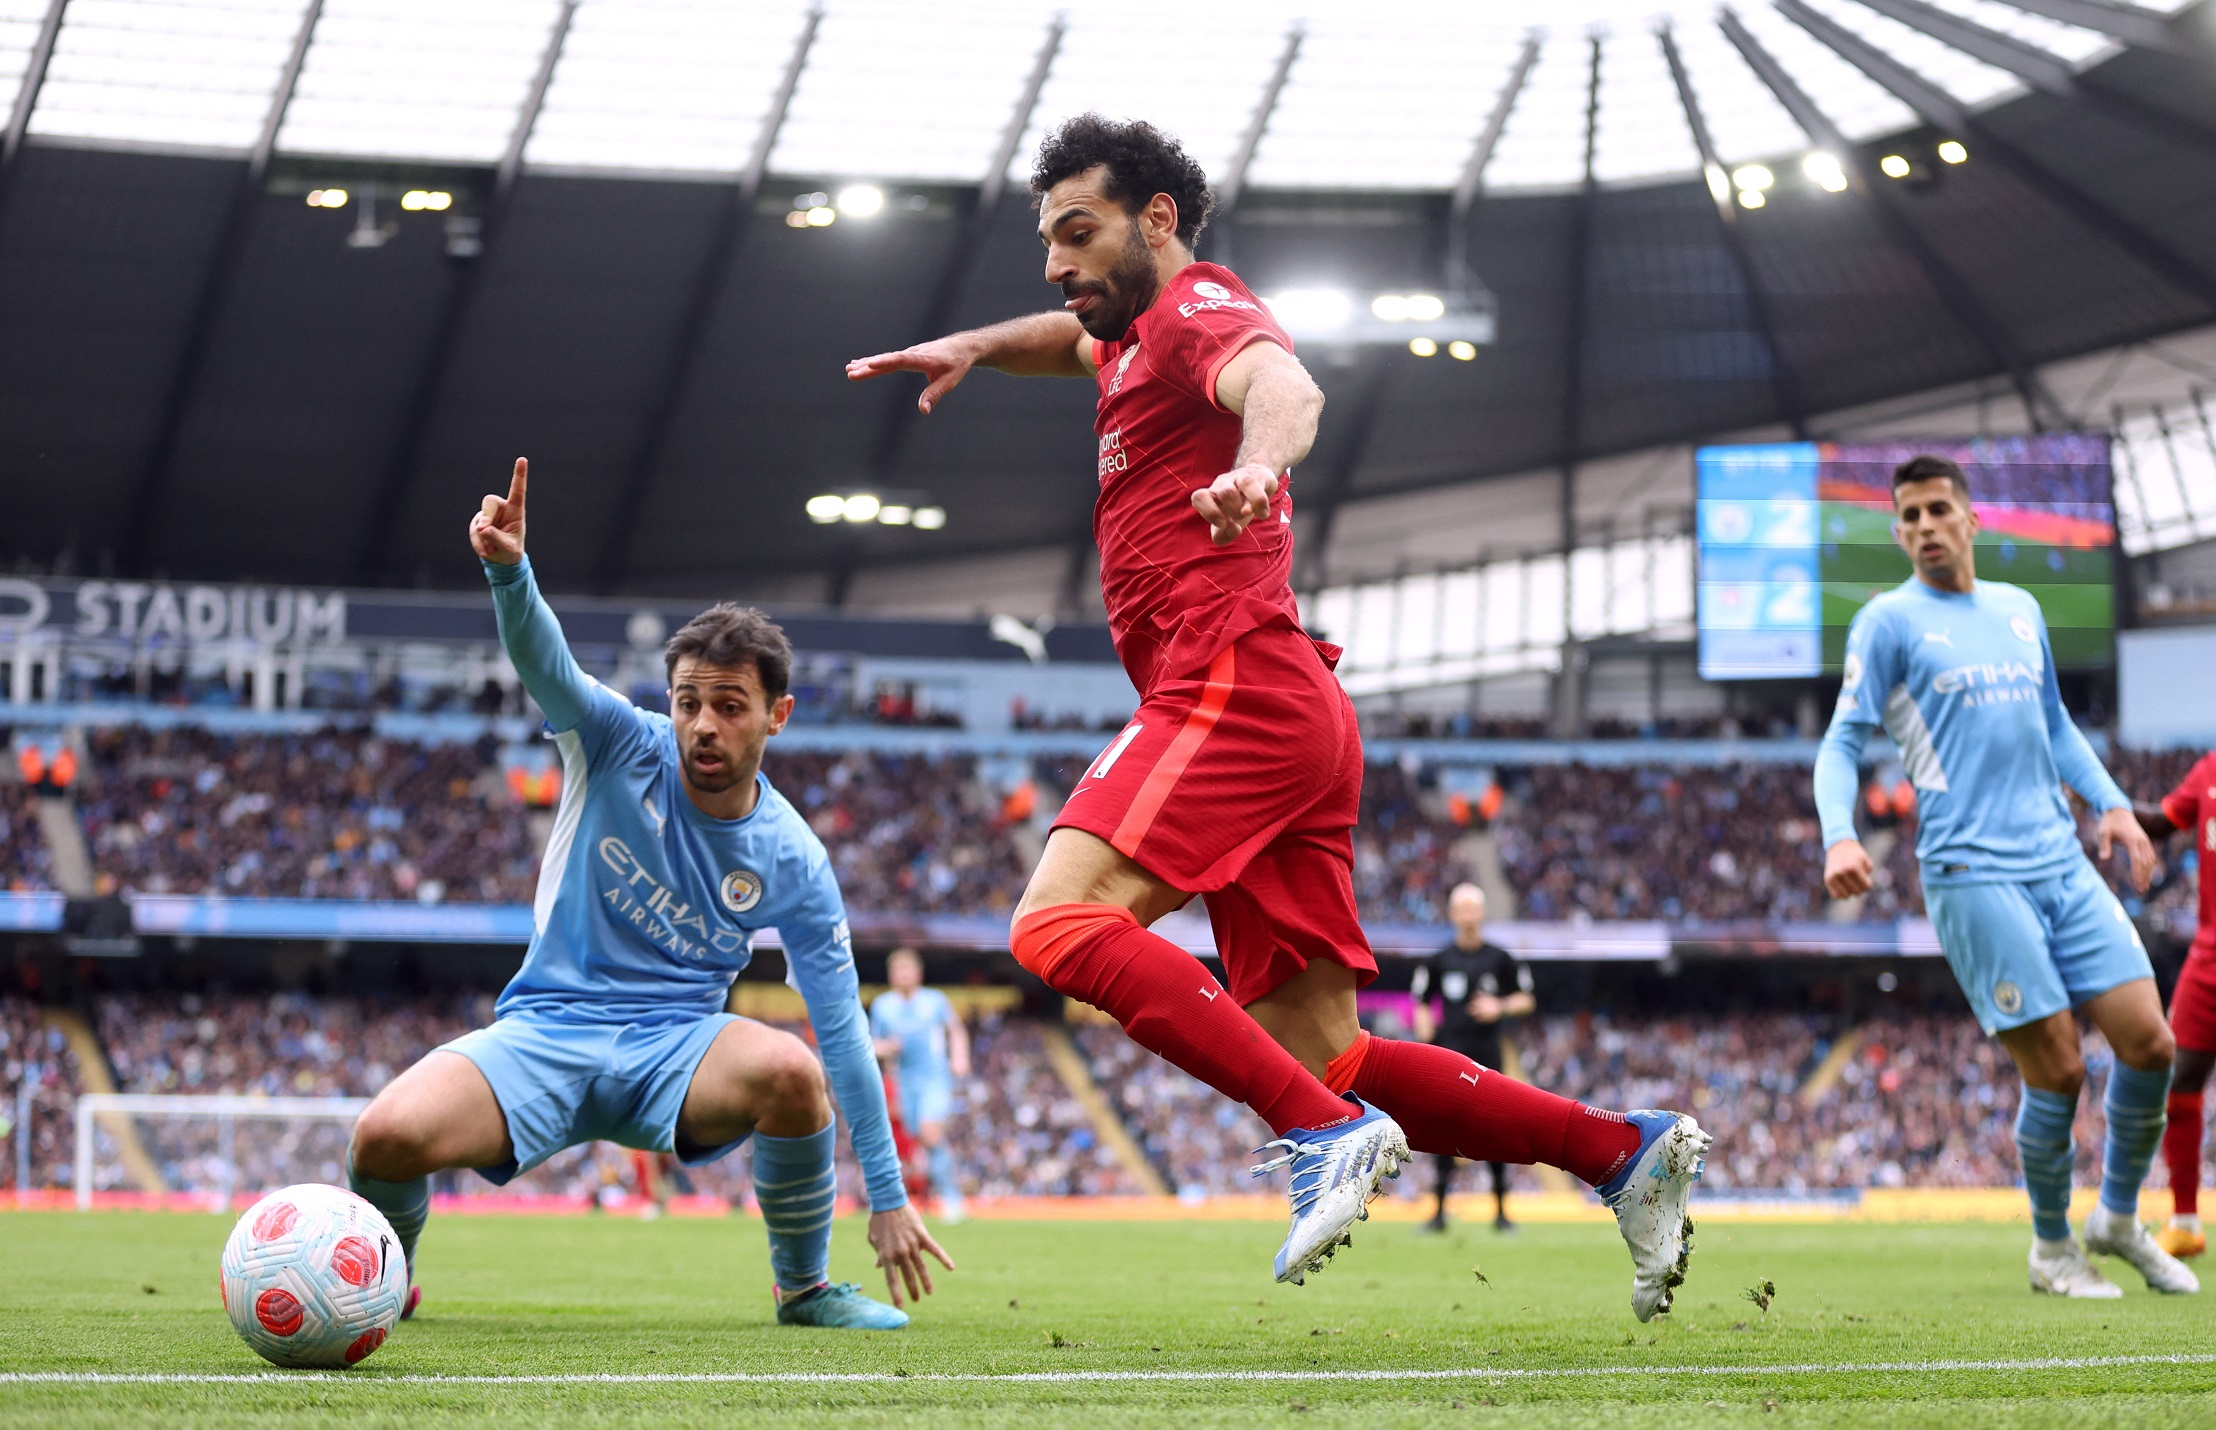 Premier League Title Clash: Liverpool vs Manchester City - Can the Reds Reign Supreme at Anfield?